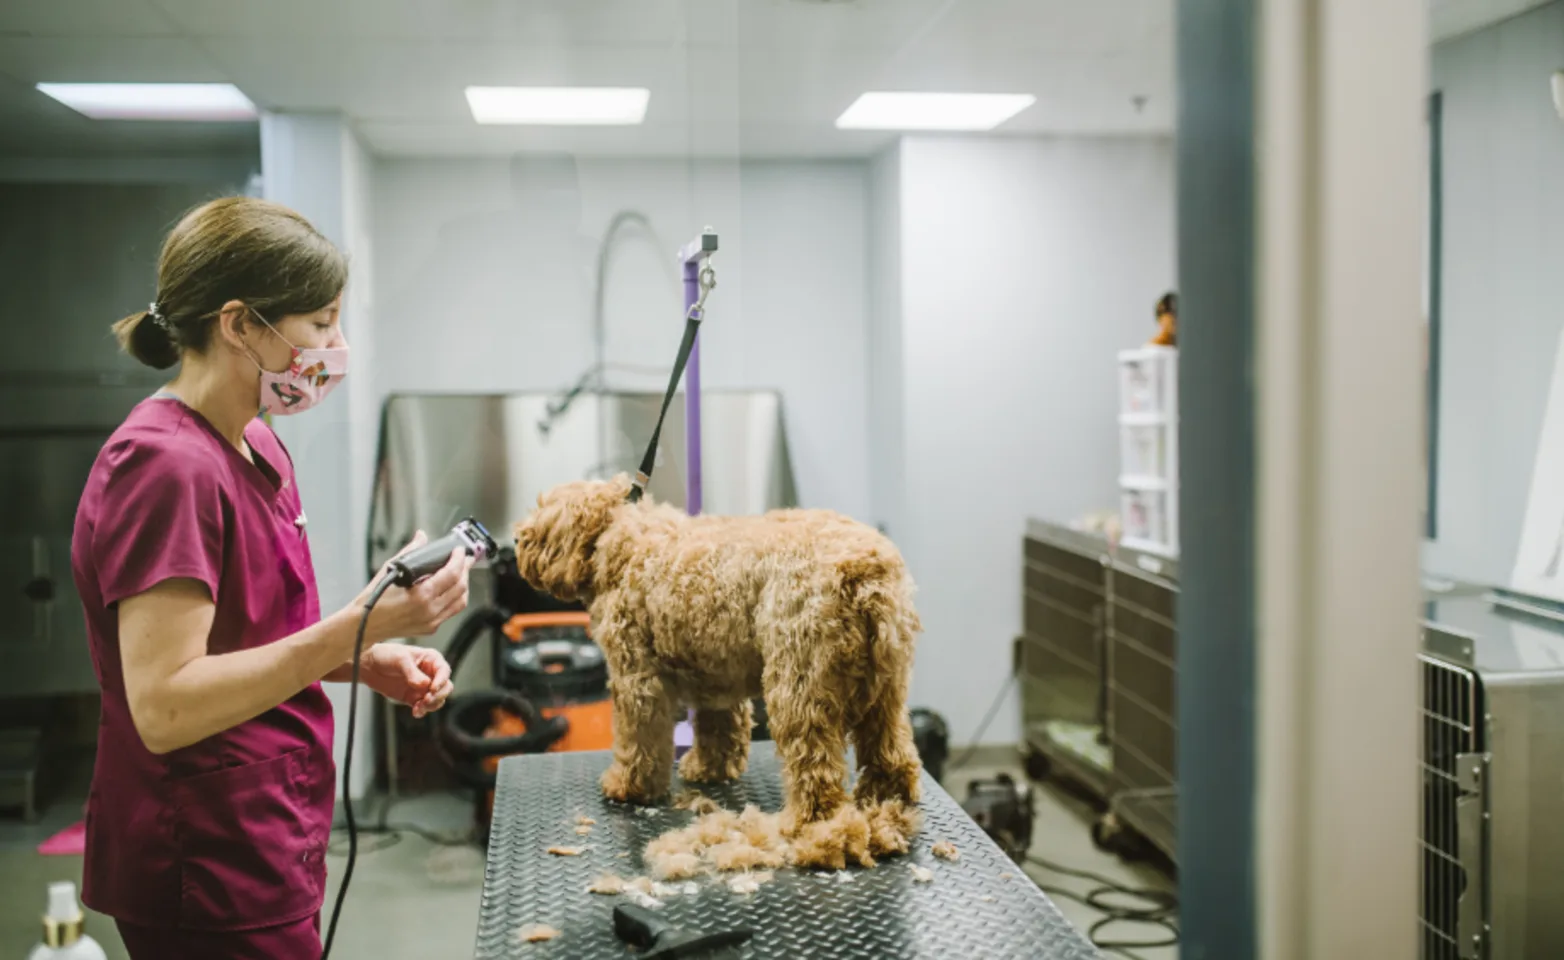 Staff Giving a Dog a Trim on Silver Table